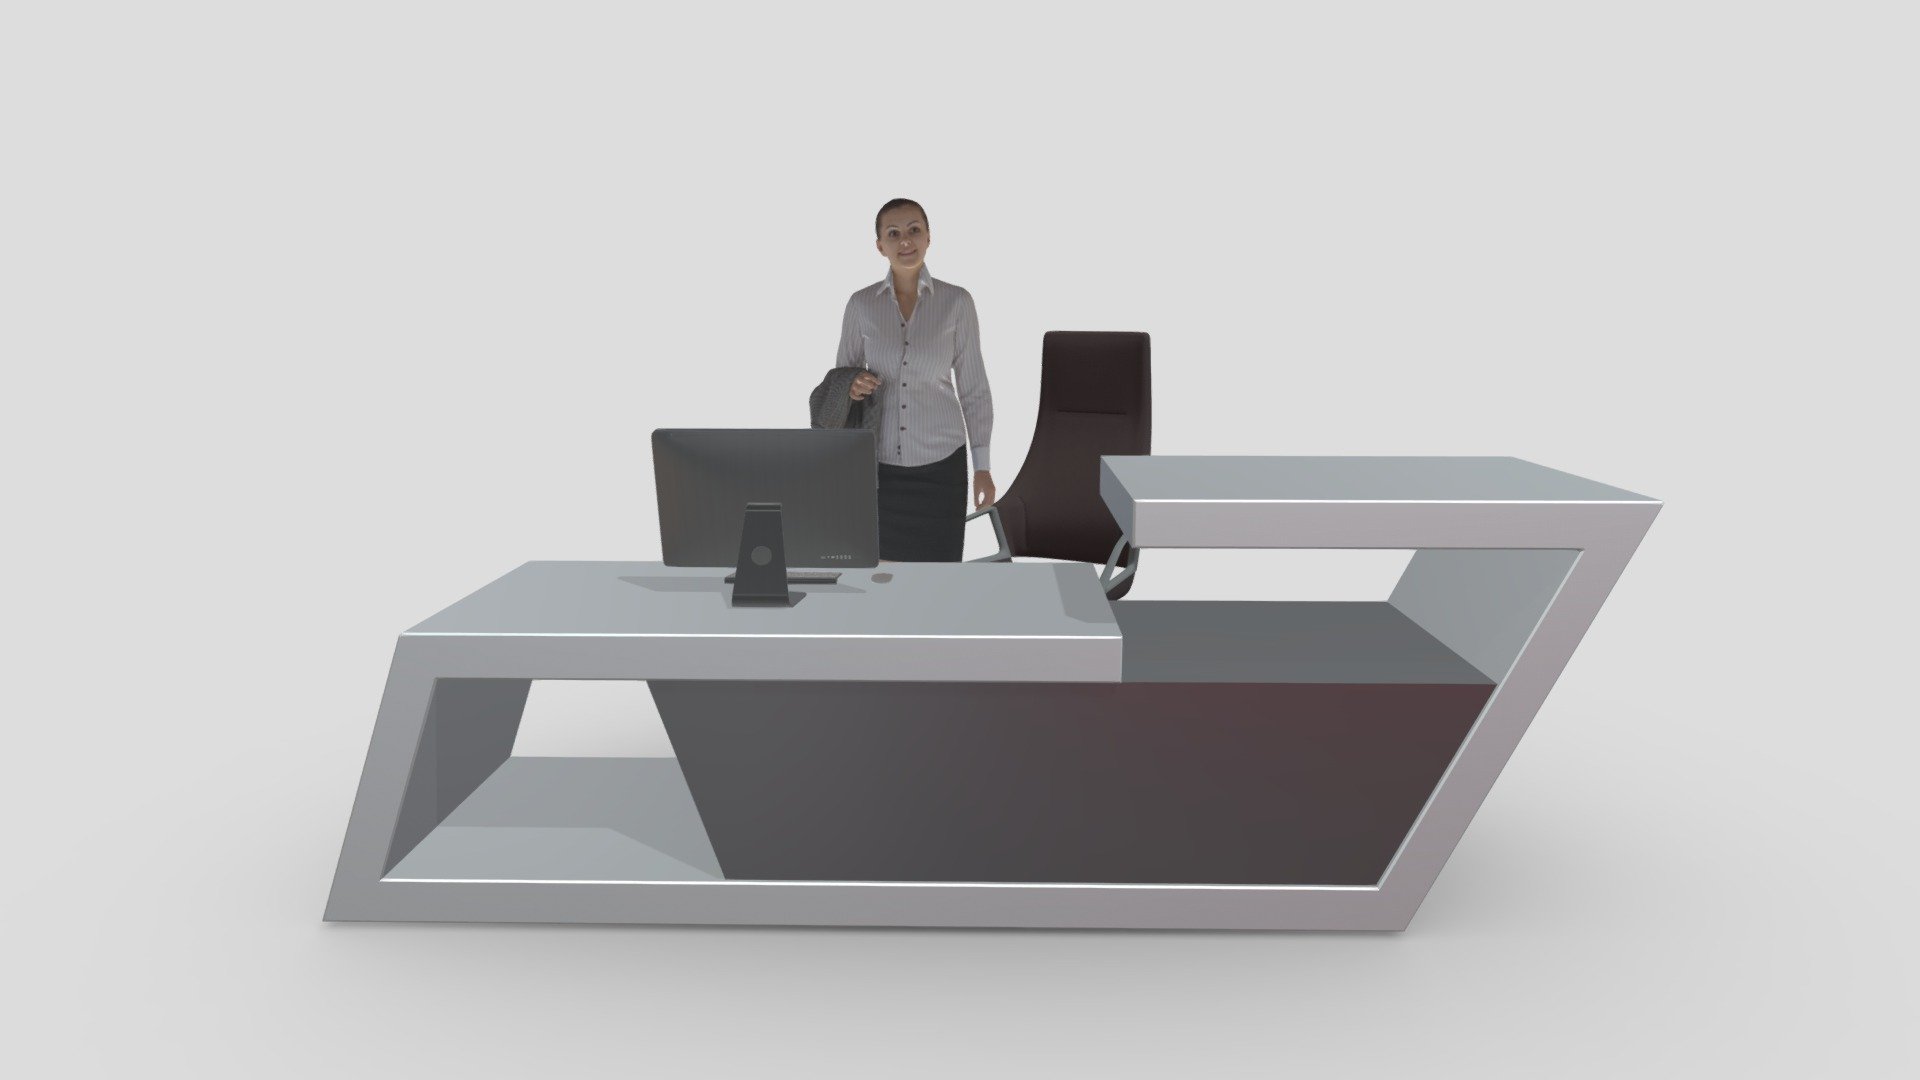 Reception Desk - 017

Native Format File : 3Ds Max 2020 &ndash; Rendering by Vray Next

File save as : 3Ds Max 2017 with converted all object to Editable Poly.

Exporting Formats :
Autodesk FBX ( .fbx ) and OBJ ( .obj &amp; .mtl ).

All 10 Texture maps are include as JPG.

Support 24/7 3d model